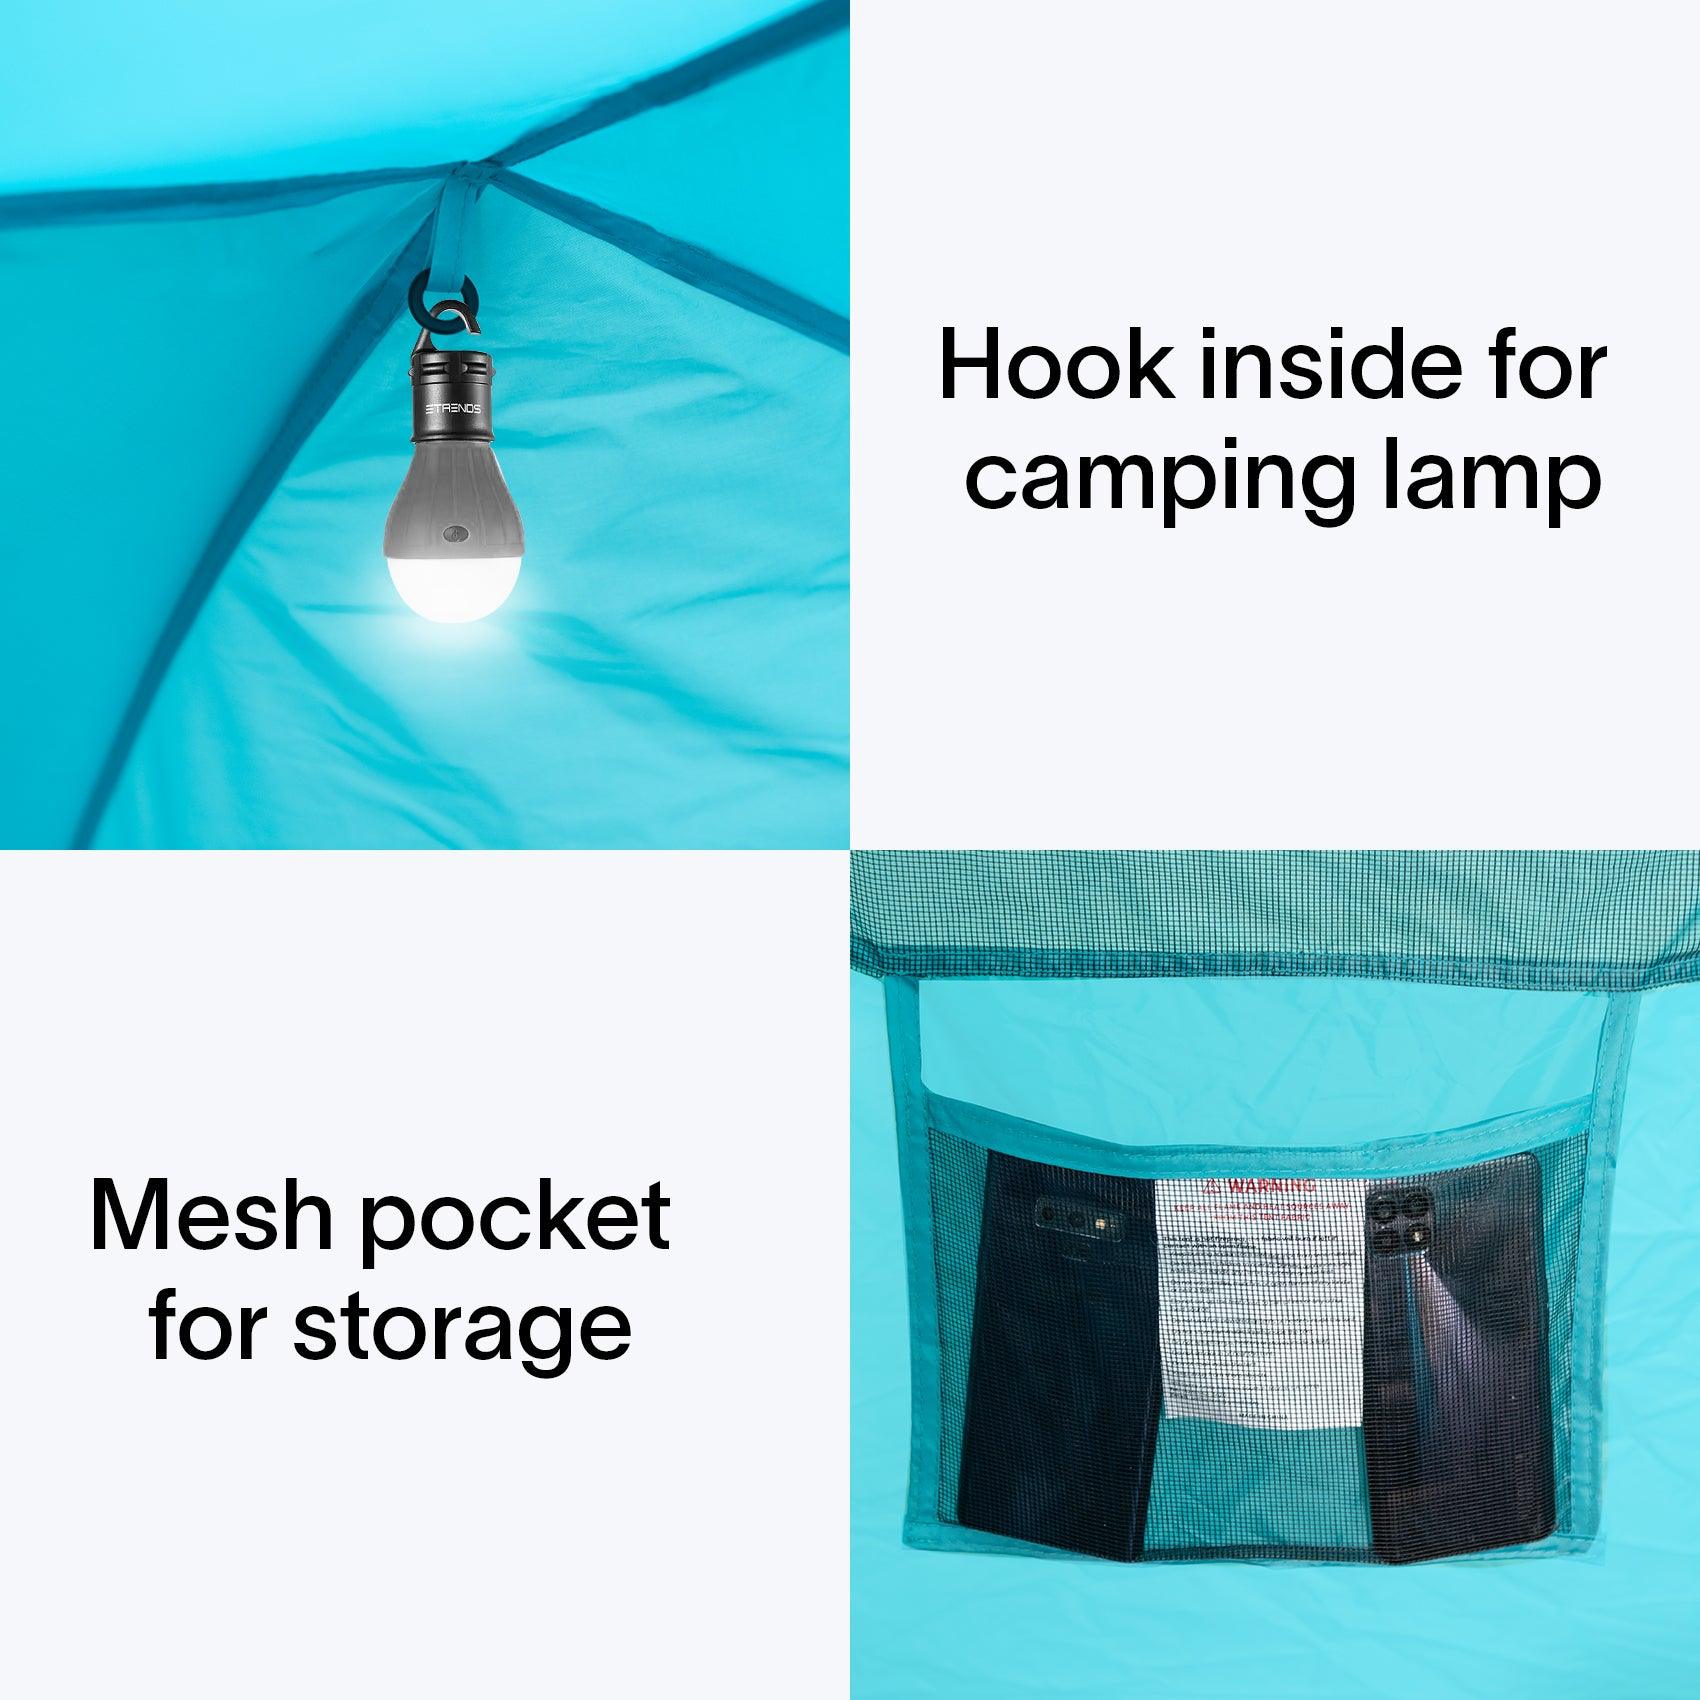 Inside you can hook lights and storage items